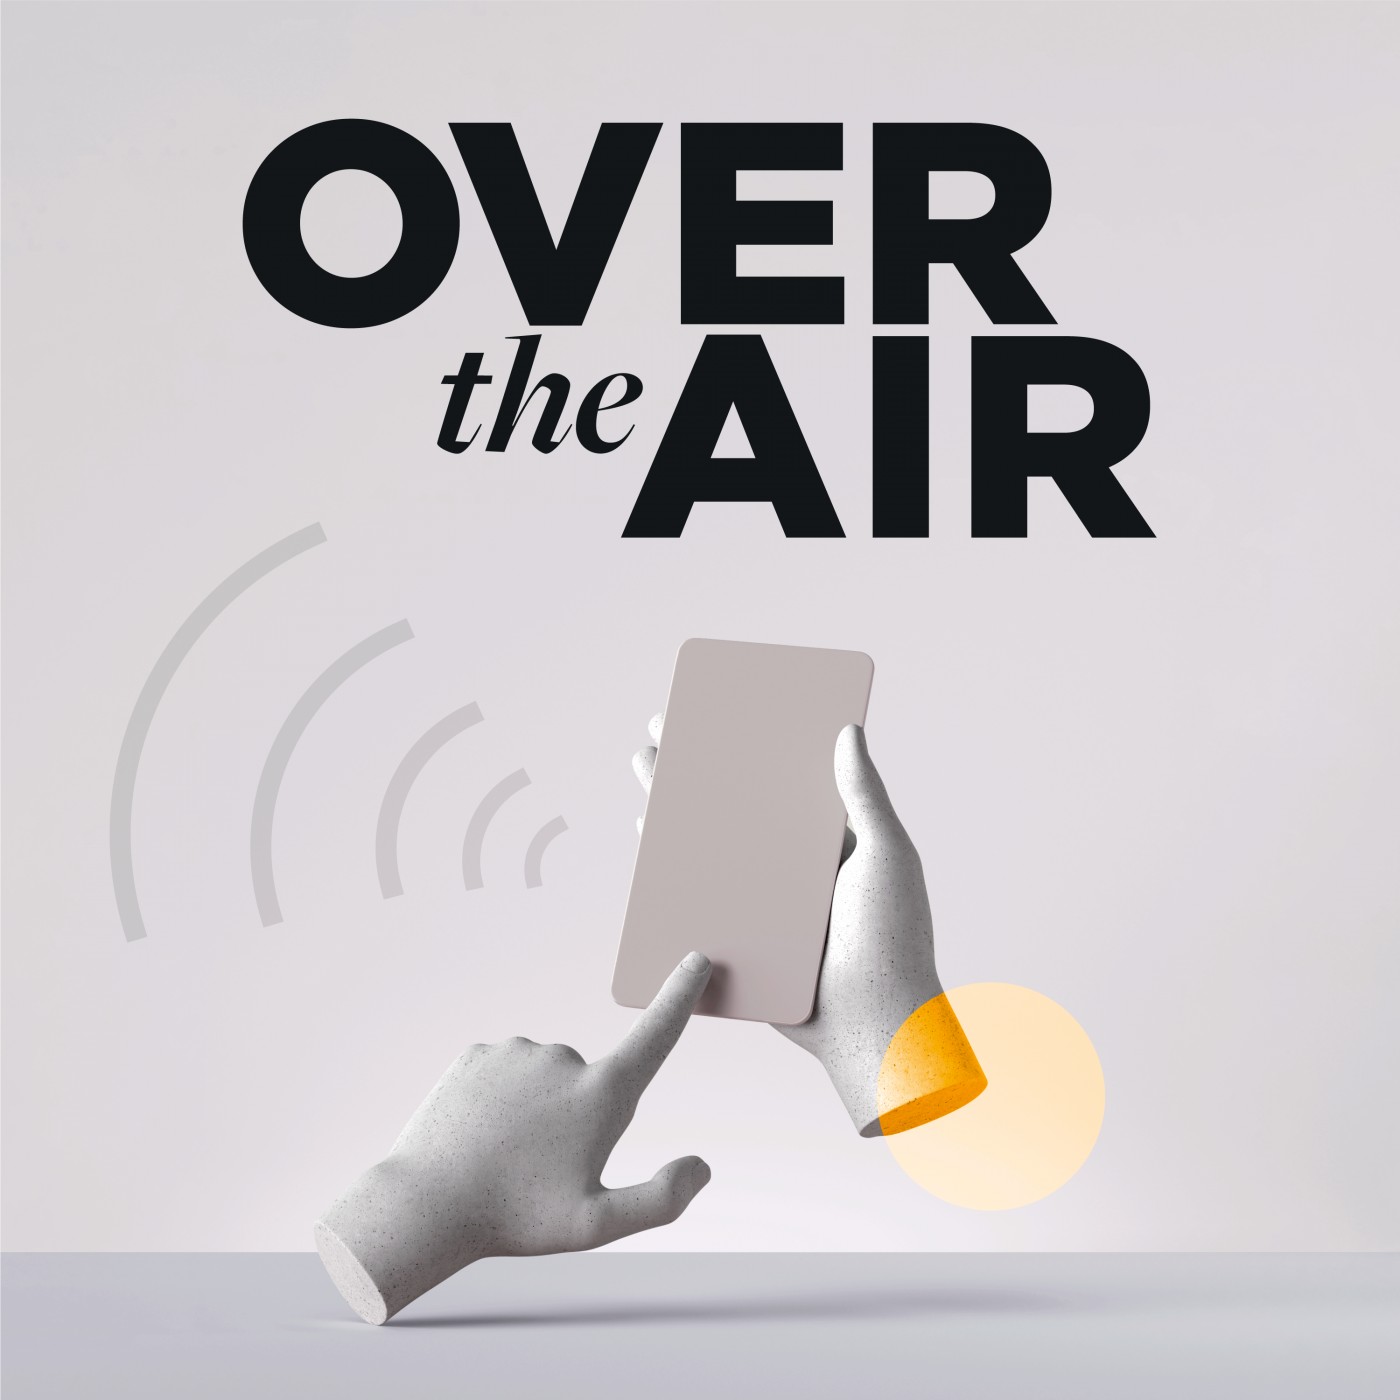 Over the Air - IoT, Connected Devices, & the Journe‪y